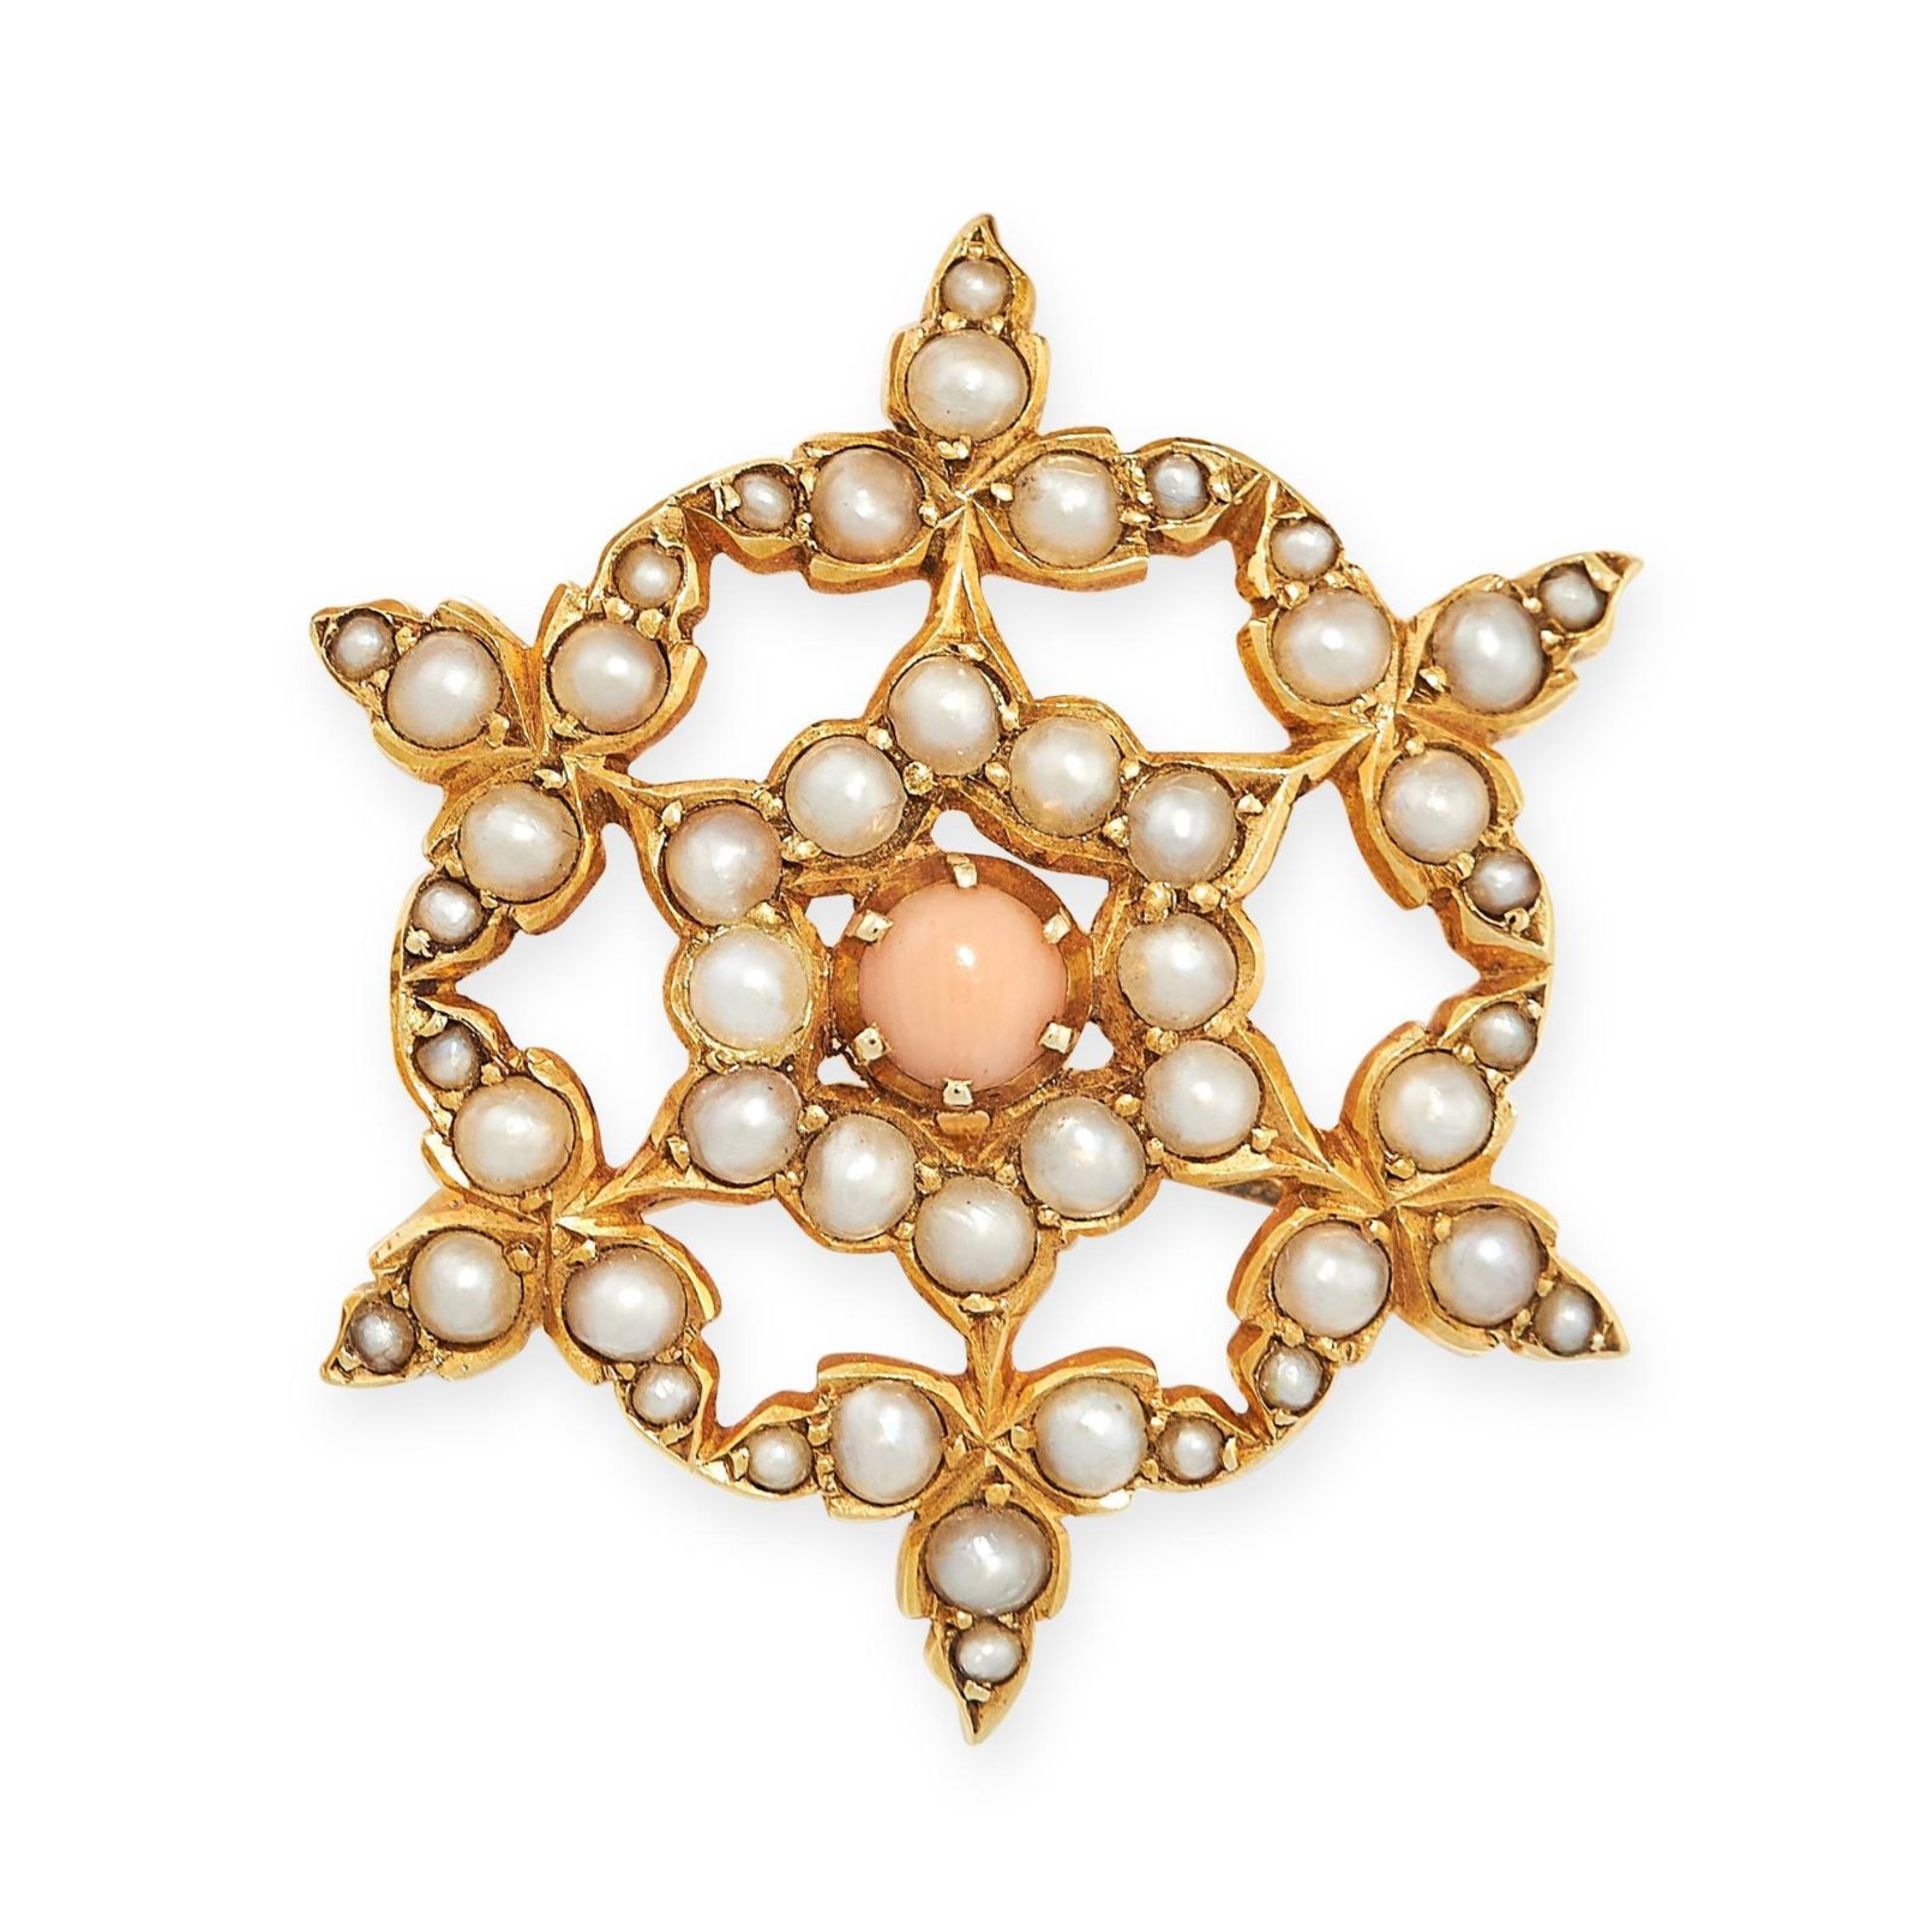 AN ANTIQUE CORAL AND PEARL BROOCH, 19TH CENTURY